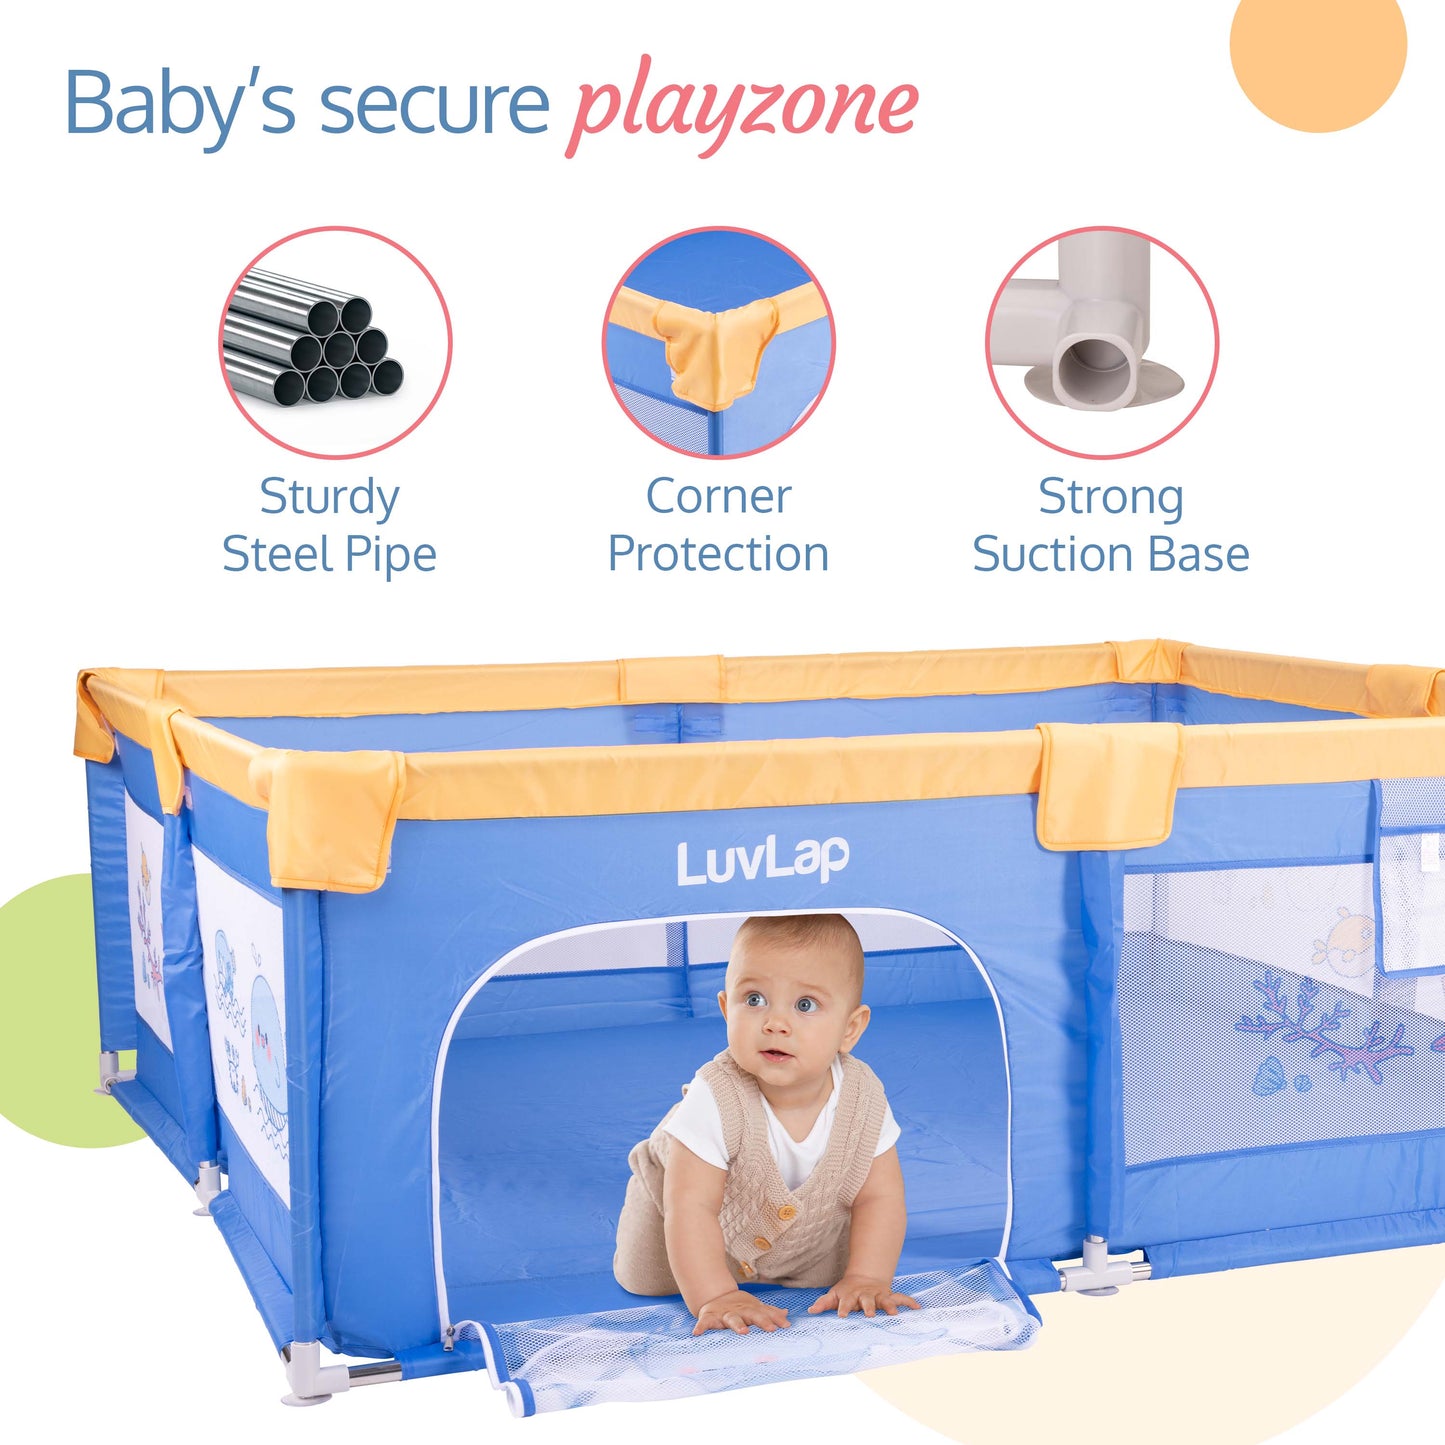 Large Baby Playpen, Baby Playard, Baby Play Yard, Play Pens for Babies and Toddlers, BPA - Free, Non - Toxic, Easy assembly, sturdy & stable, 180cm x 150cm (Blue & Yellow)